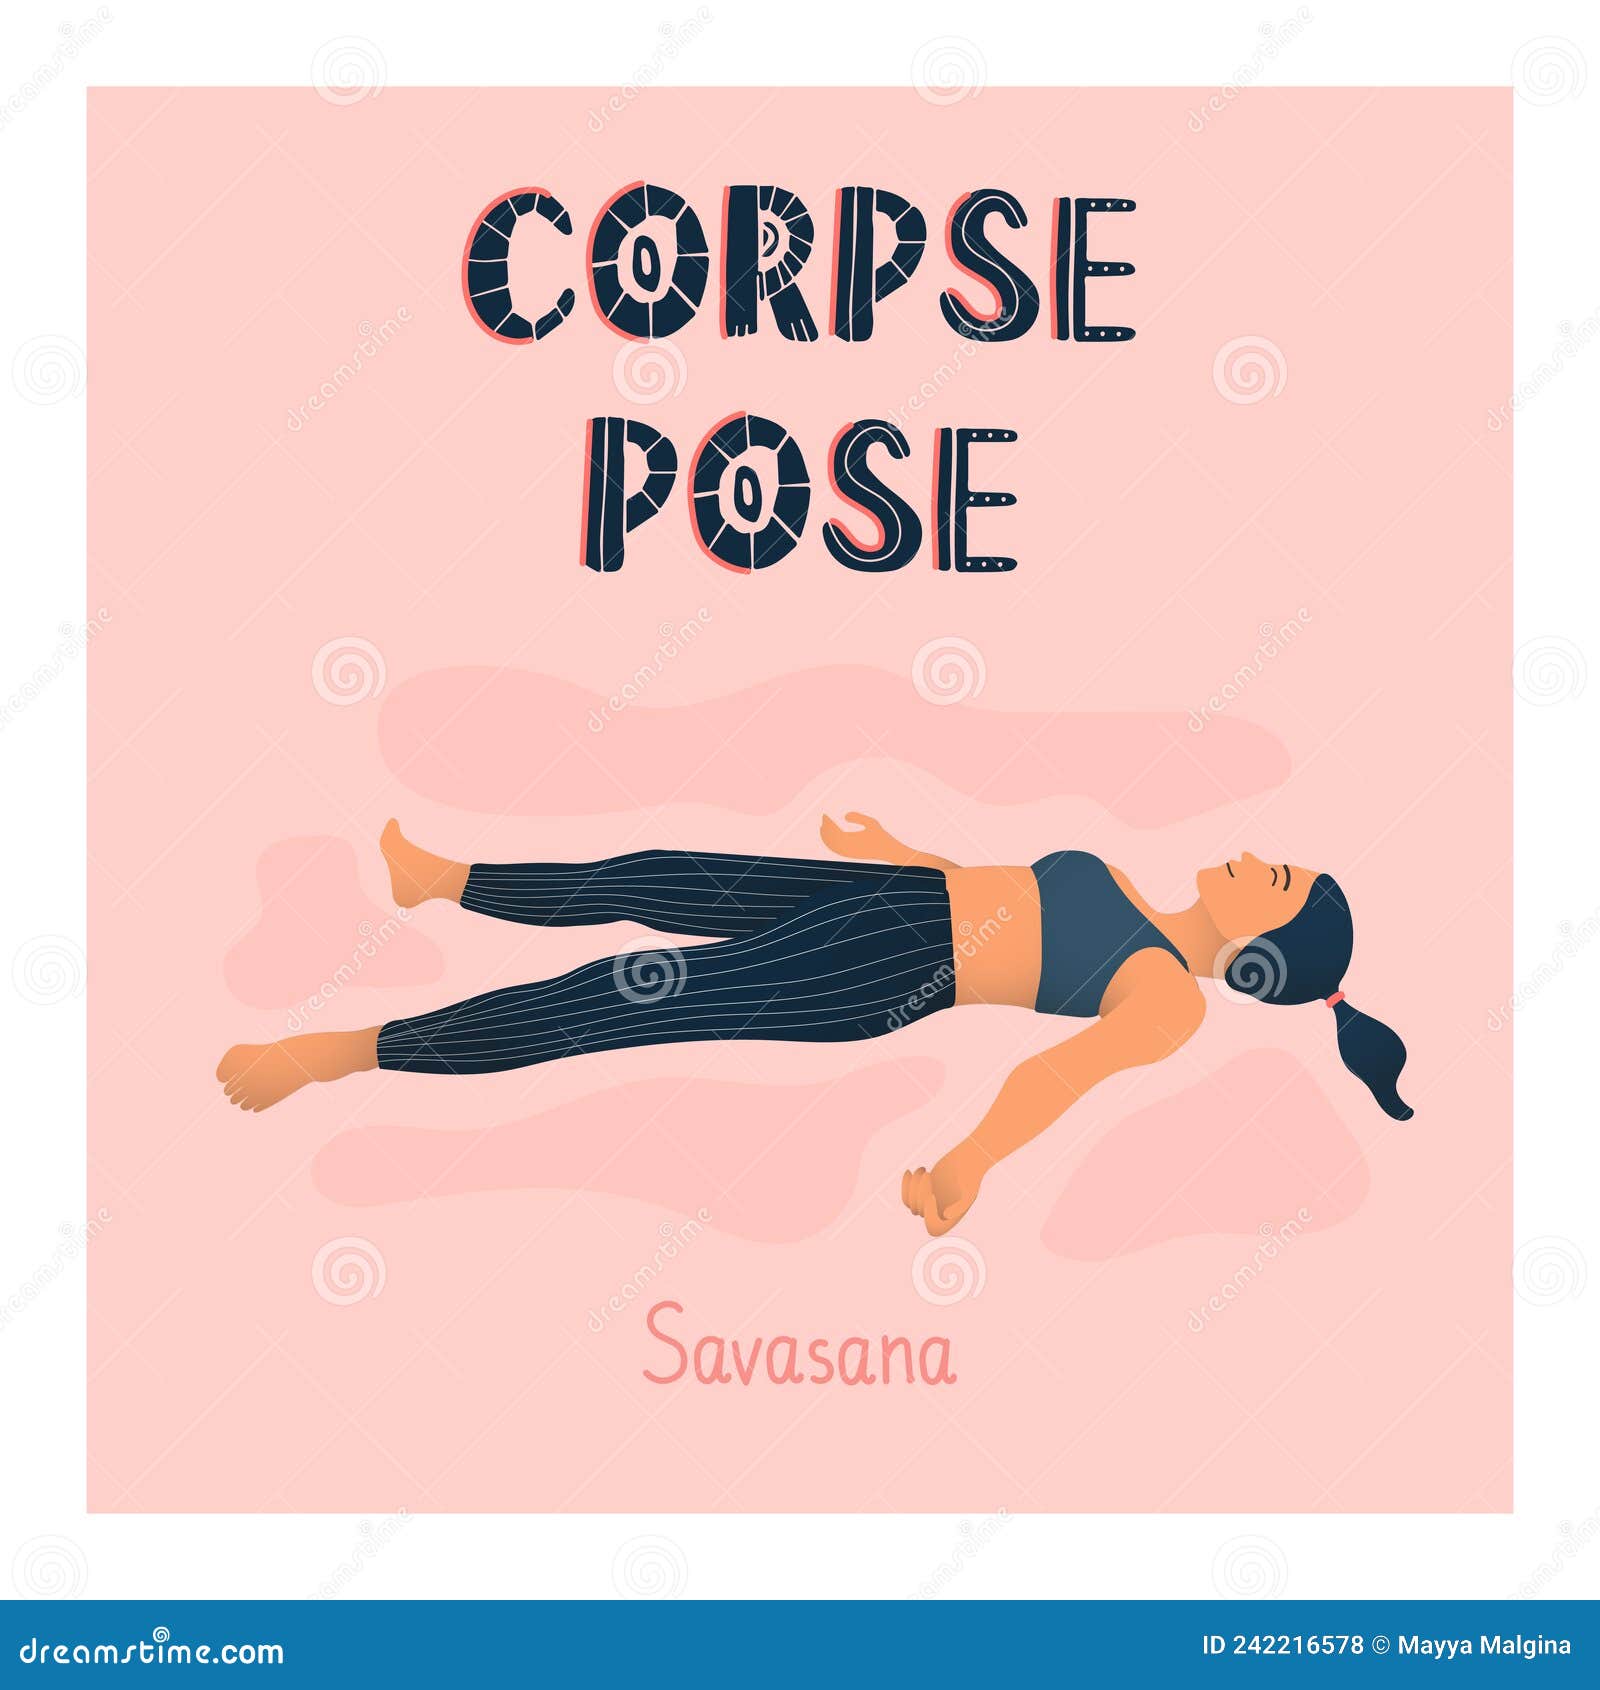 17 Poses to Work with Your Body's Limitations